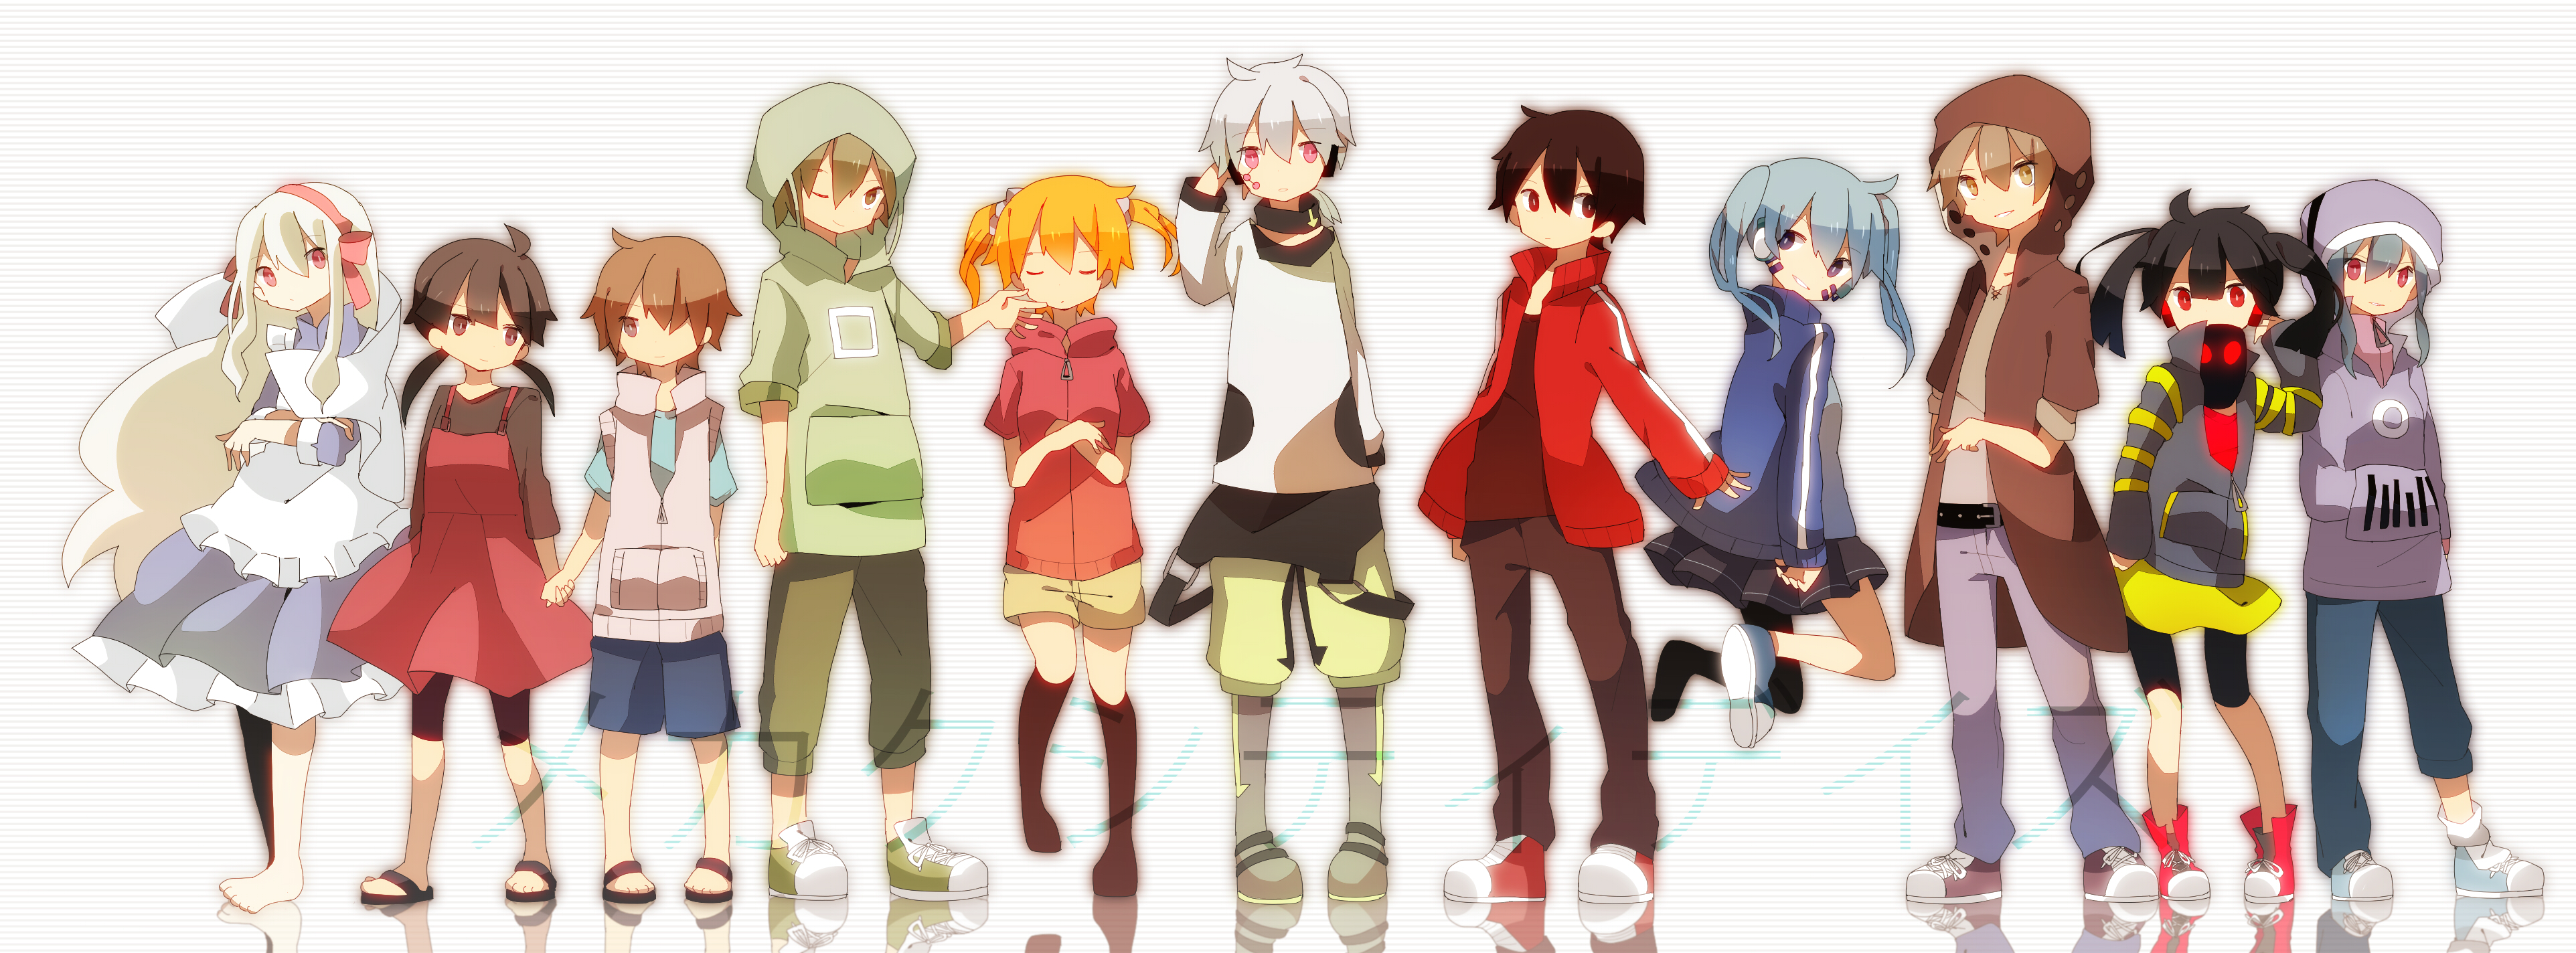 High Resolution Wallpaper | Kagerou Project 3848x1424 px